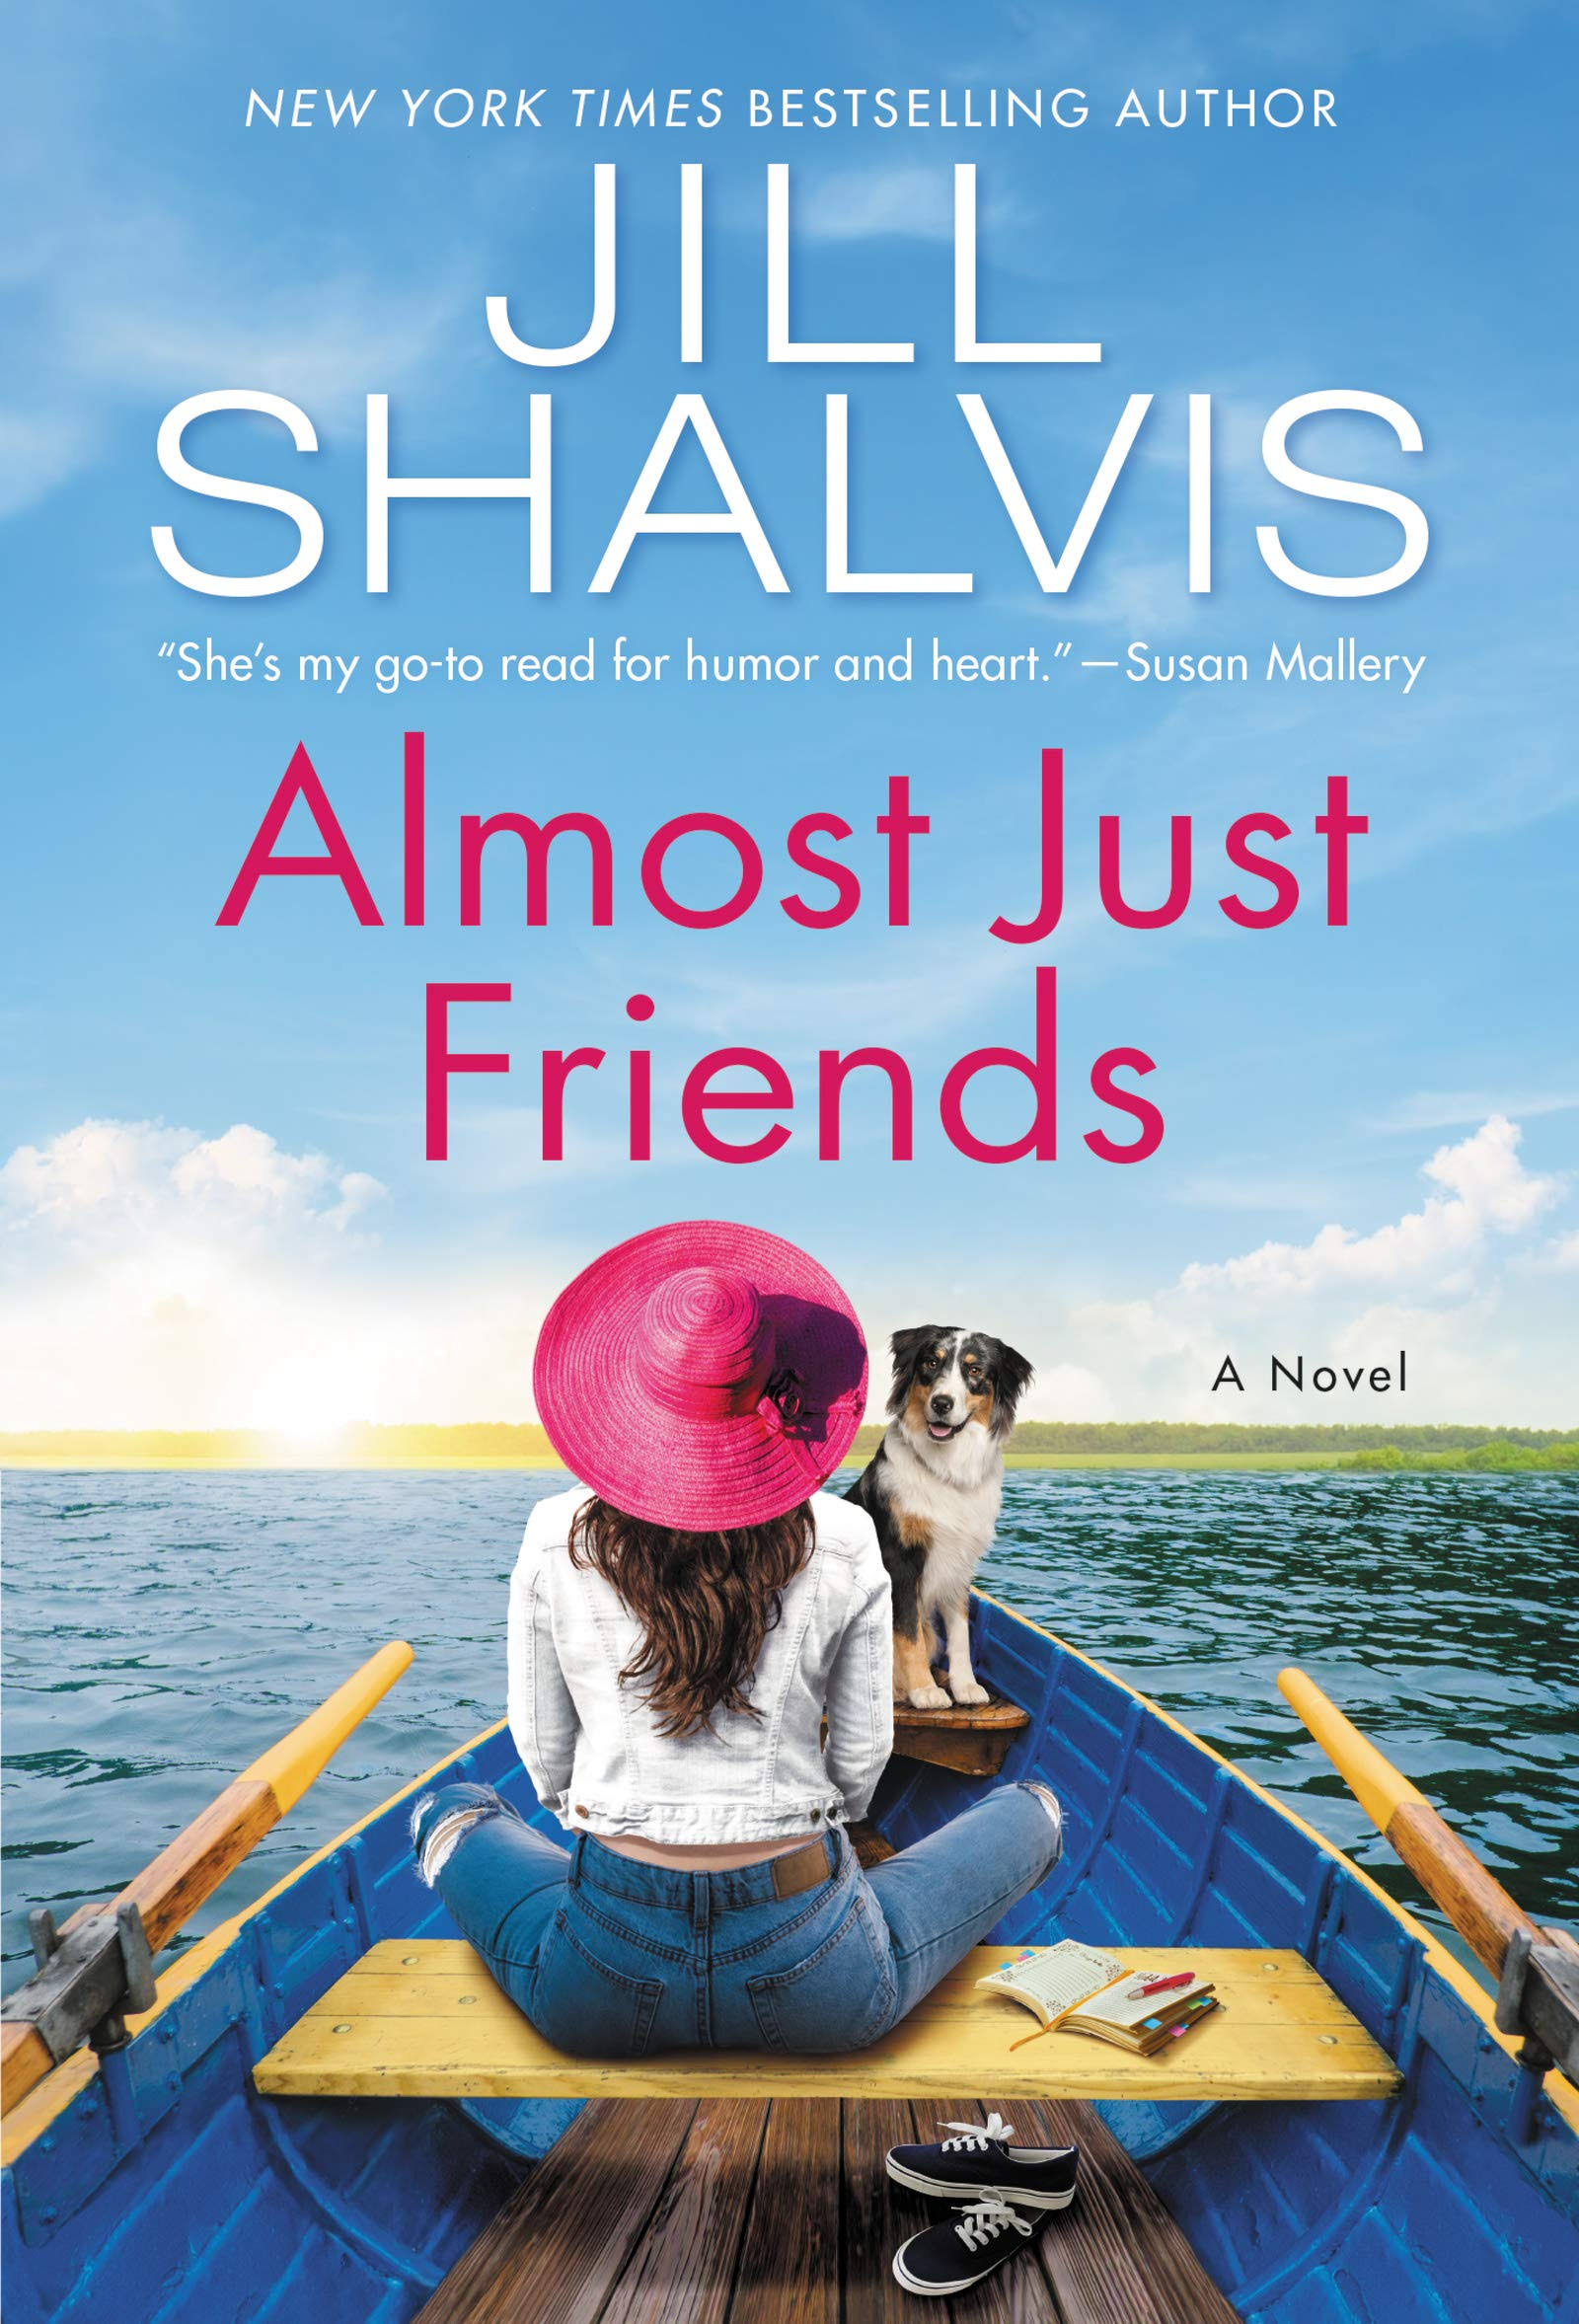 Almost Just Friends by Jill Shalvis (9780063032682)